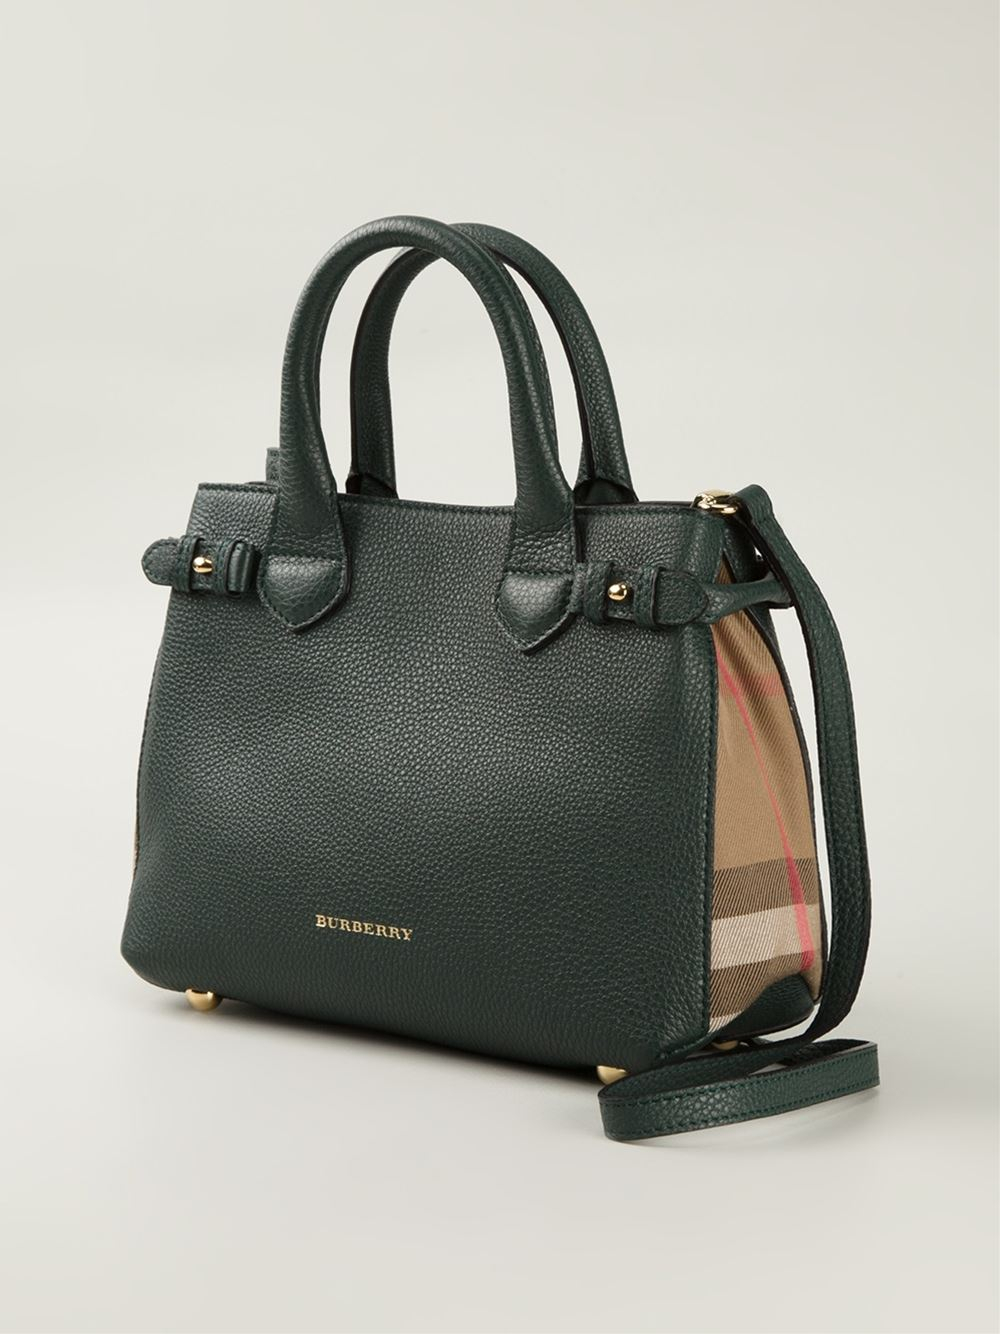 Burberry Banner Small Calf-Leather Tote in Green - Lyst